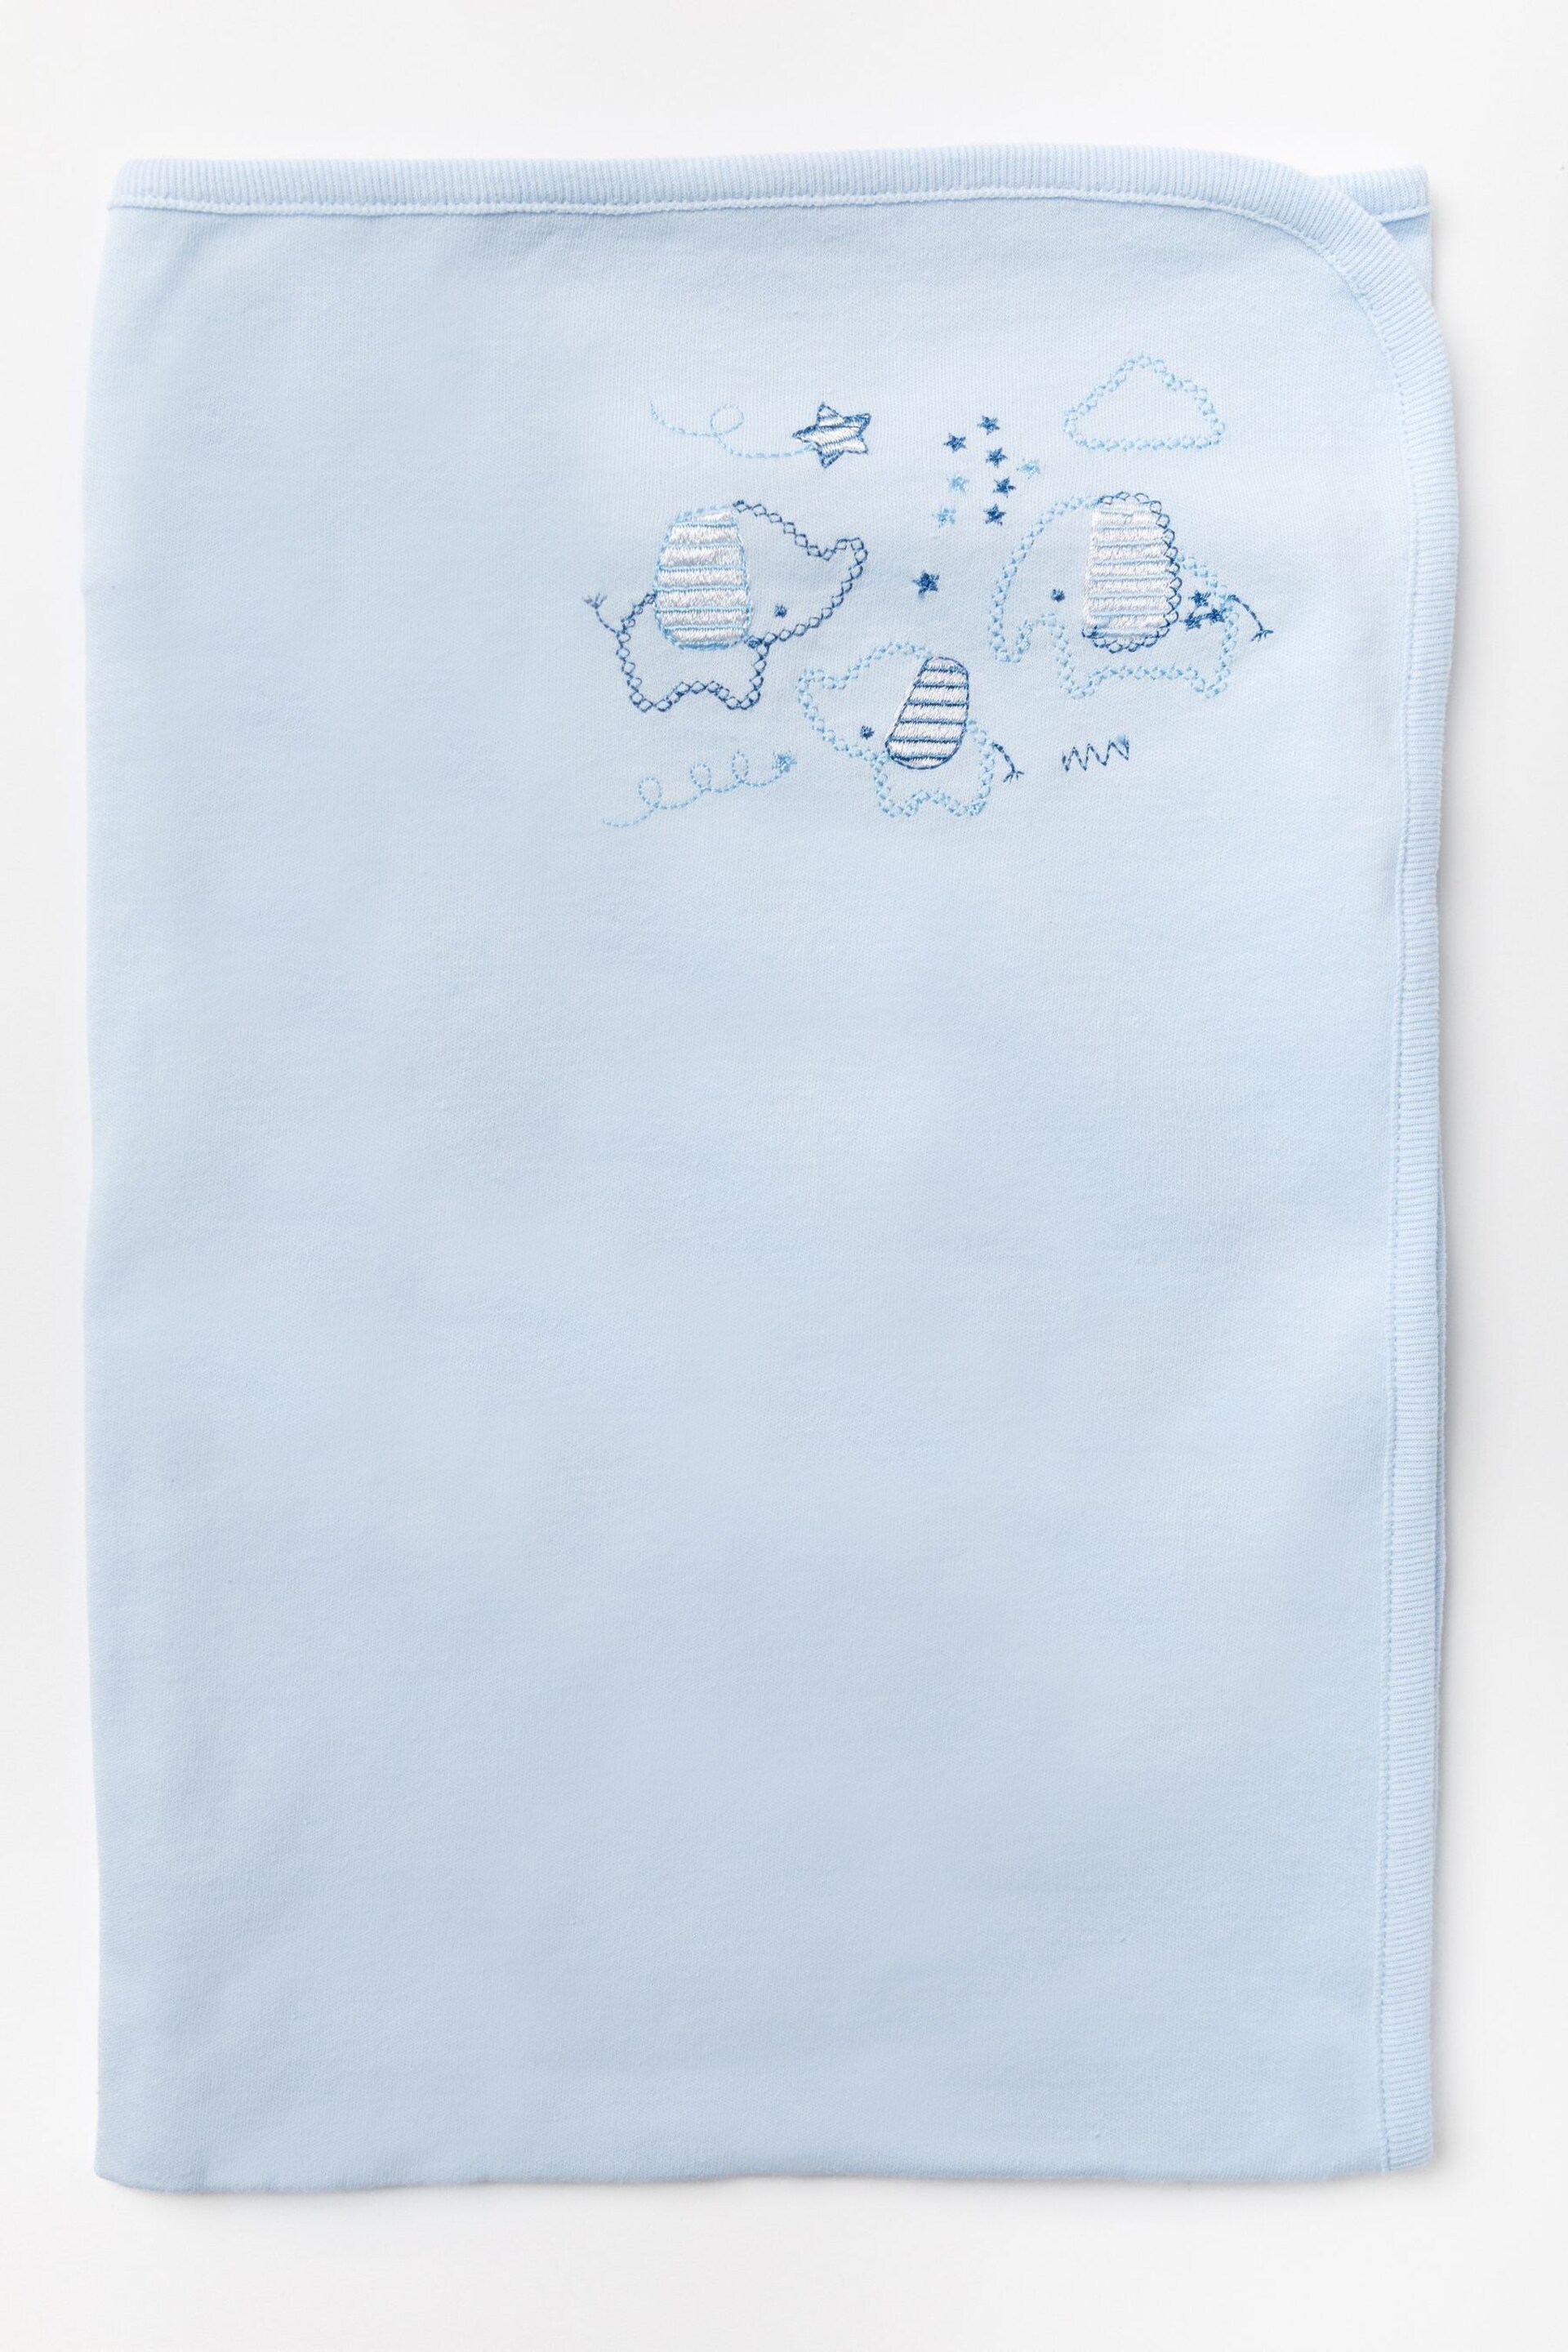 10-Piece Printed Baby Gift Set - Image 6 of 6